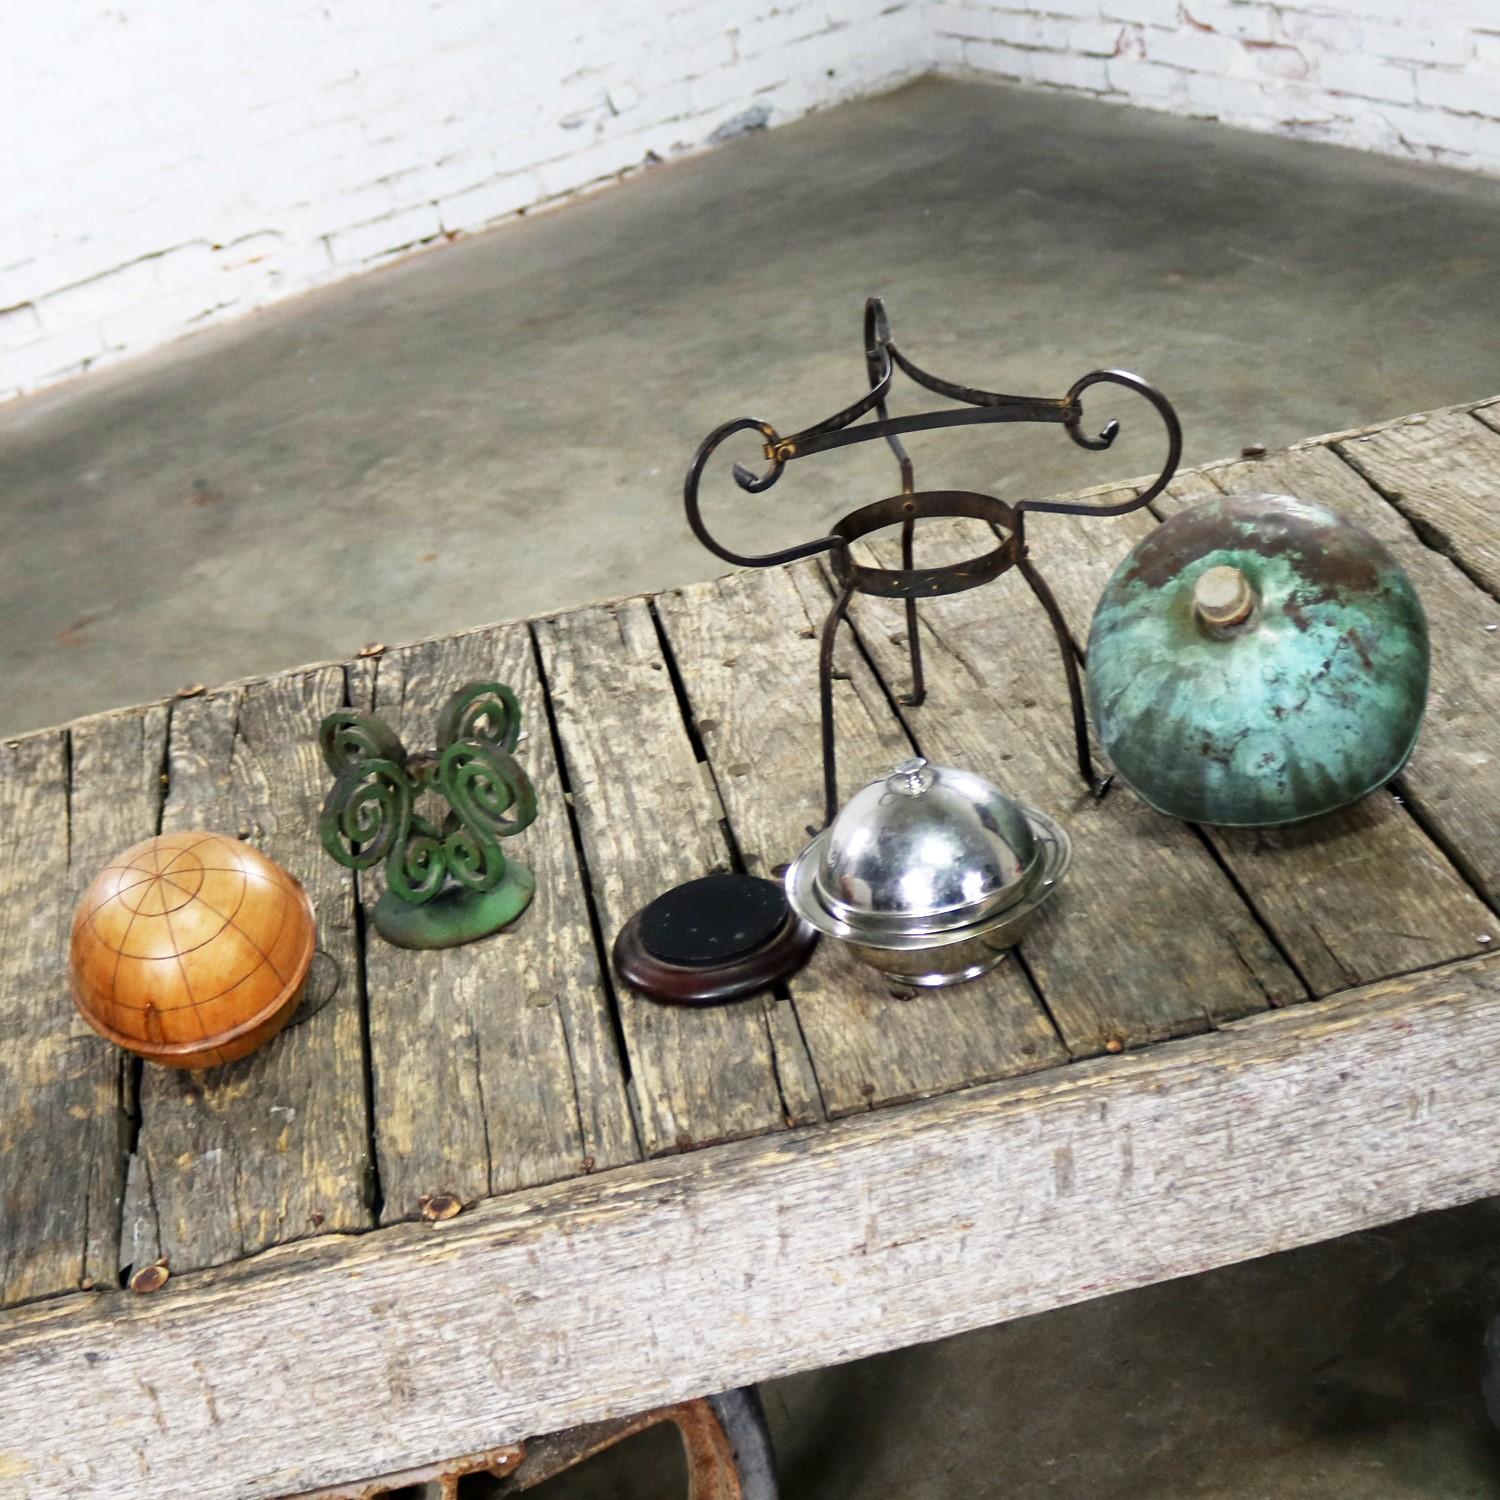 Collection of Orb Objects on Stands als Centerpiece oder Object d'Art (Kupfer) im Angebot